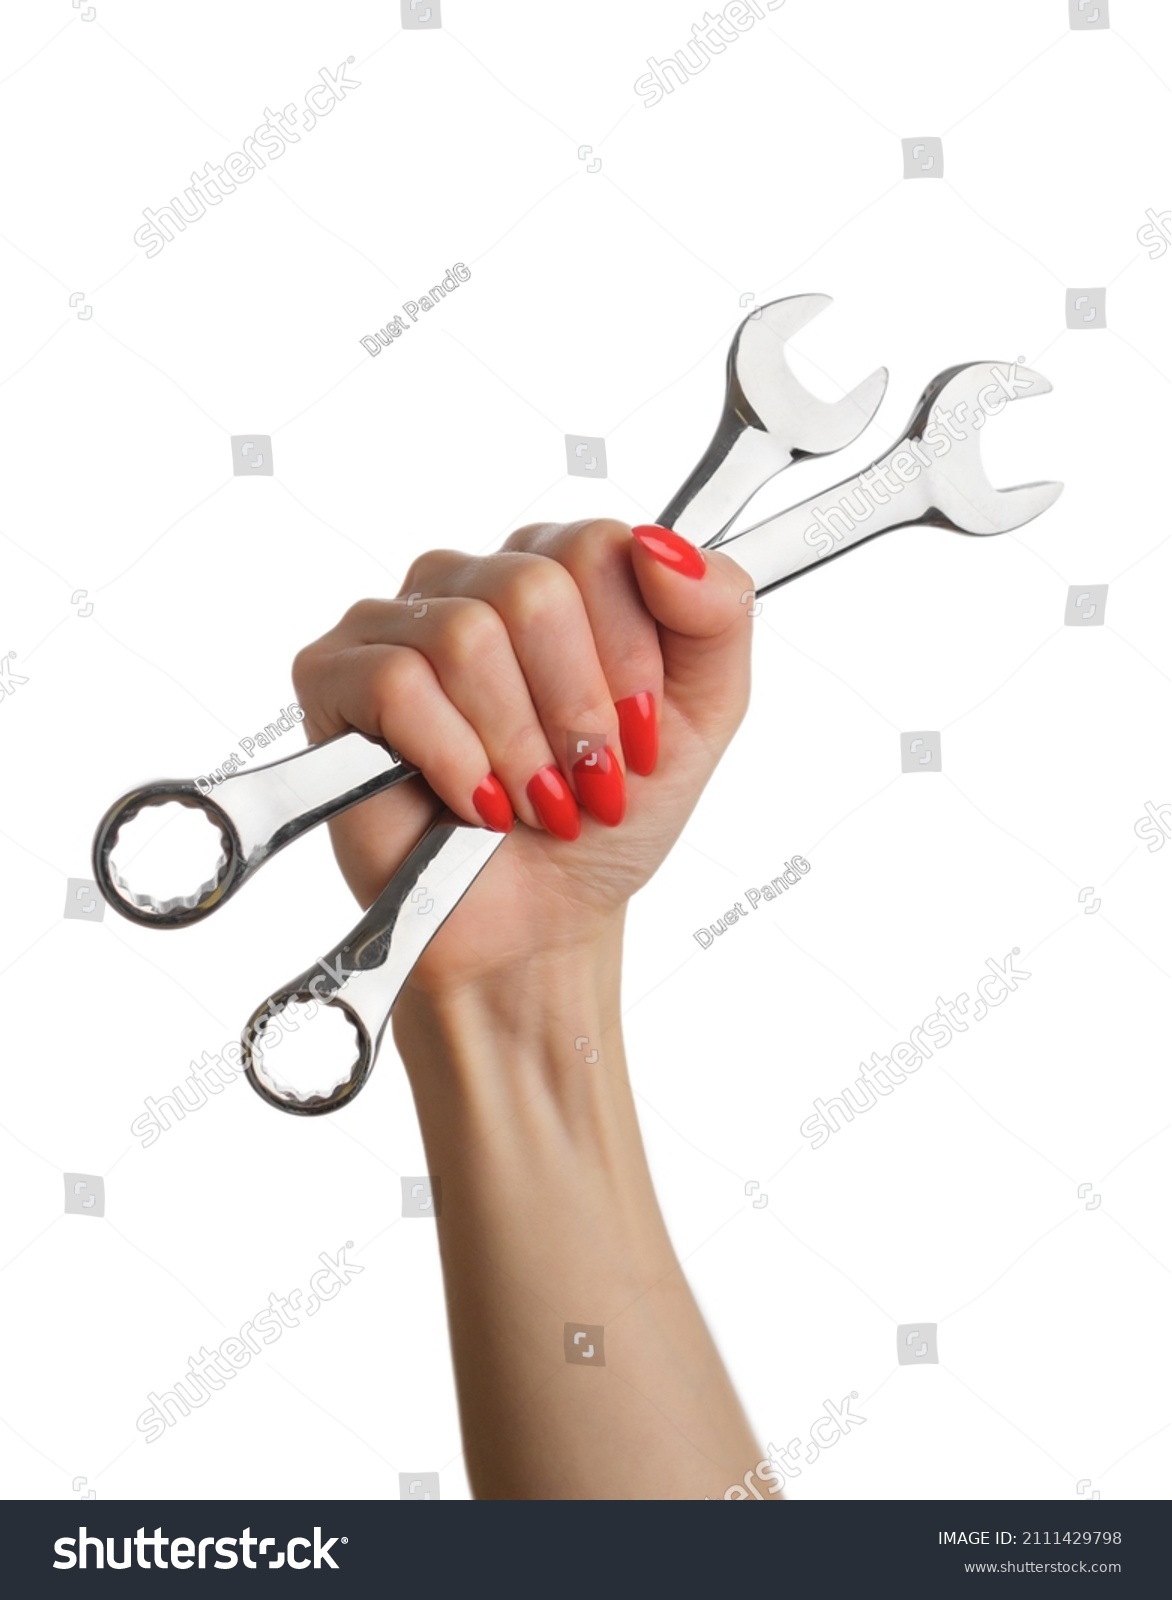 Woman's hand with a red manicure and a wrench on an isolated white background. #2111429798